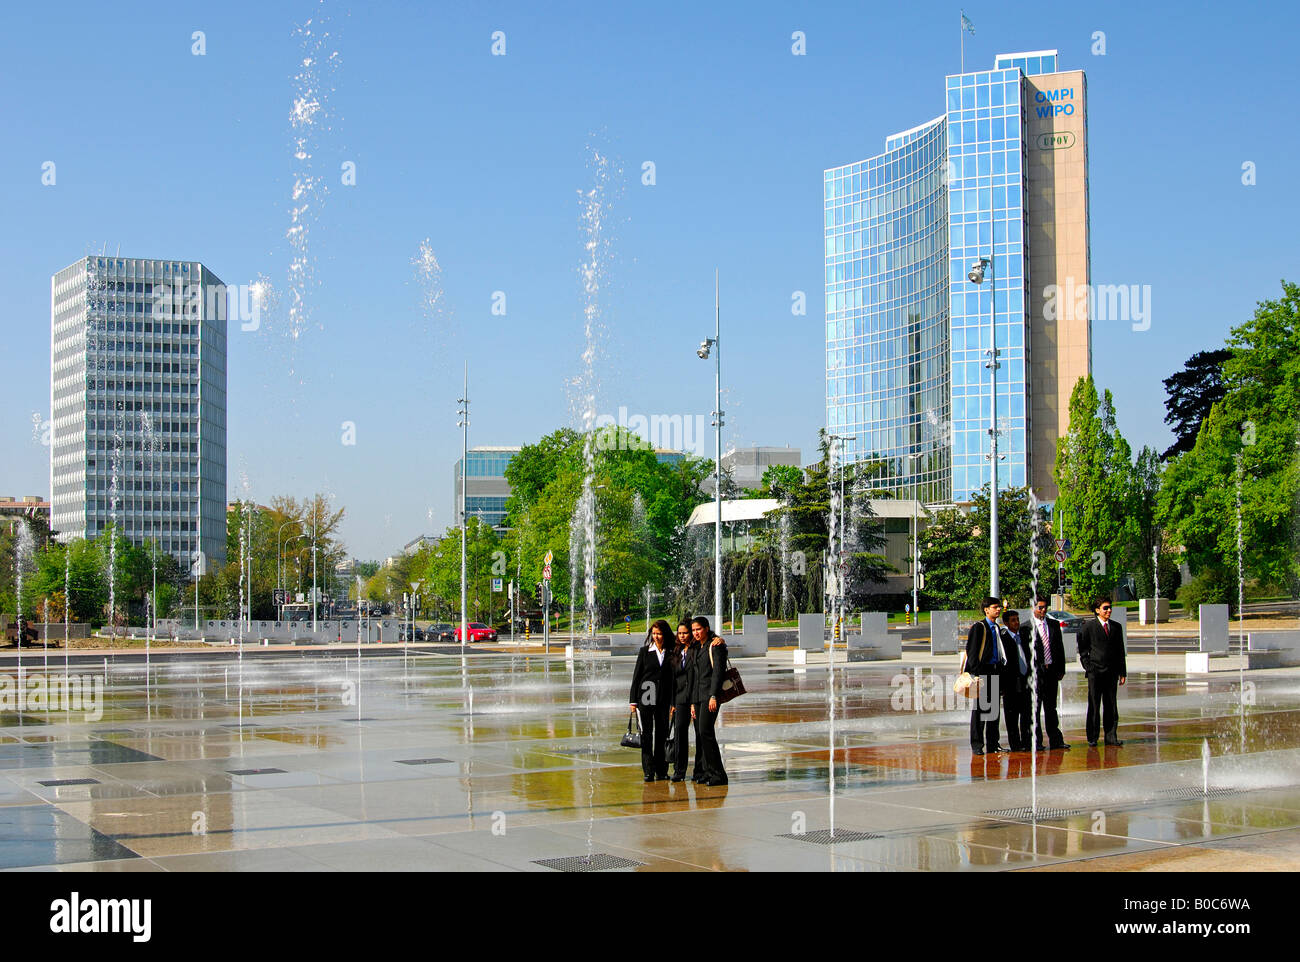 Trick fountains on Place des Nations in Geneva, ITU Headquarters left, WIPO UPOV buildings on the right, Geneva Switzerland Stock Photo